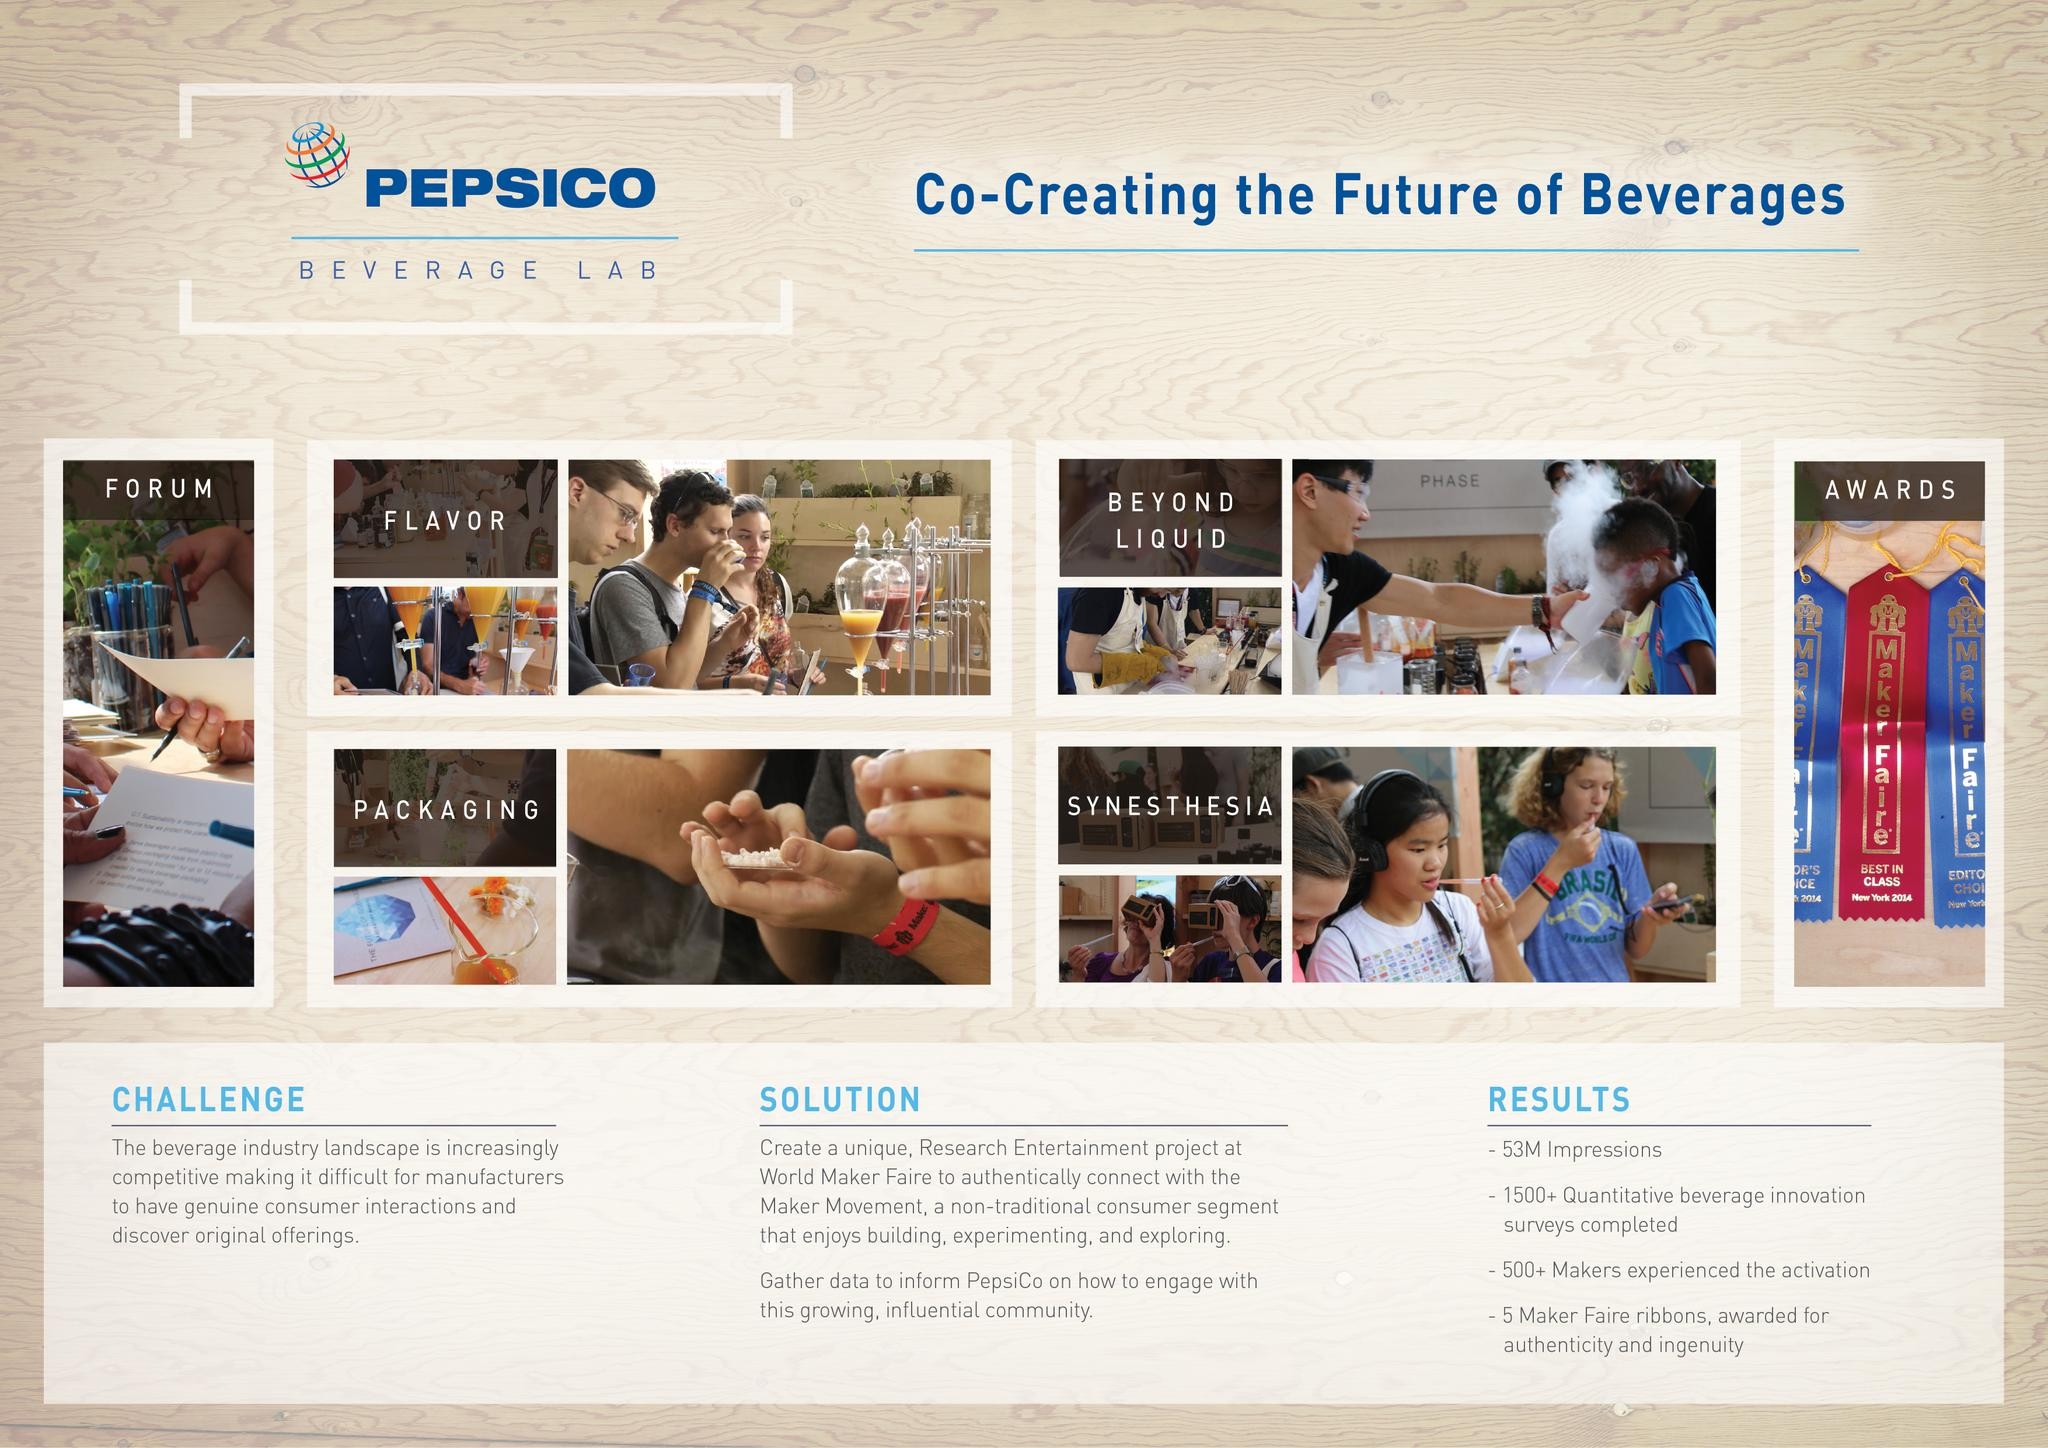 CO-CREATING THE FUTURE OF BEVERAGES